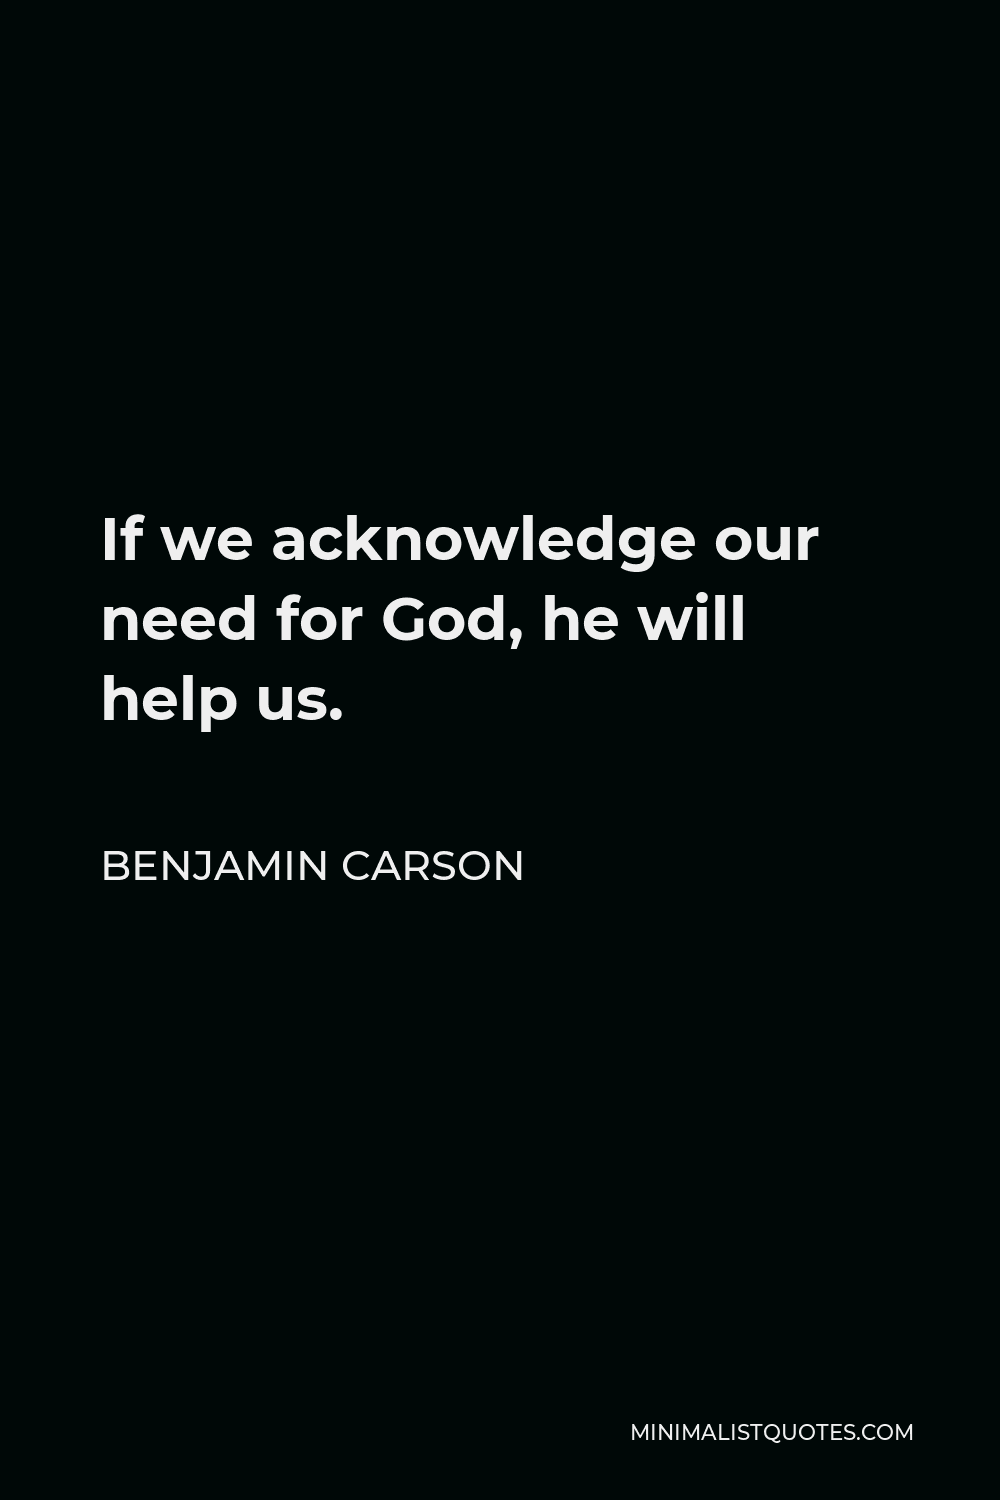 Benjamin Carson Quote - If we acknowledge our need for God, he will help us.